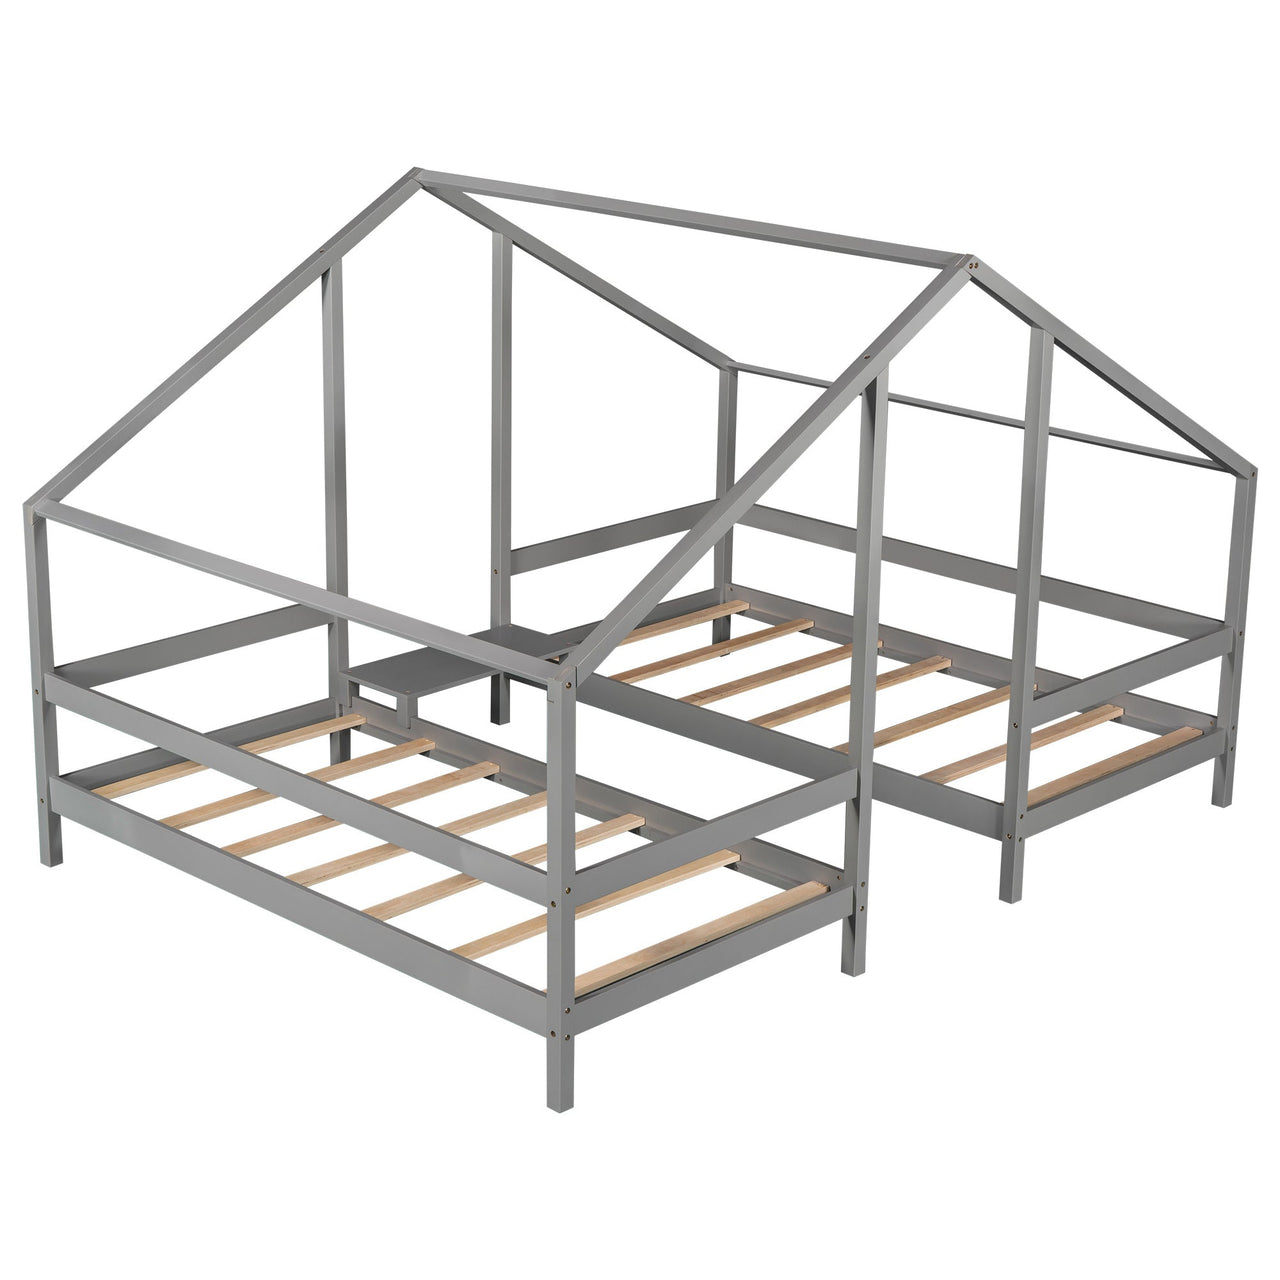 Triangular Toddler House Bed for Twin Size - Casatrail.com